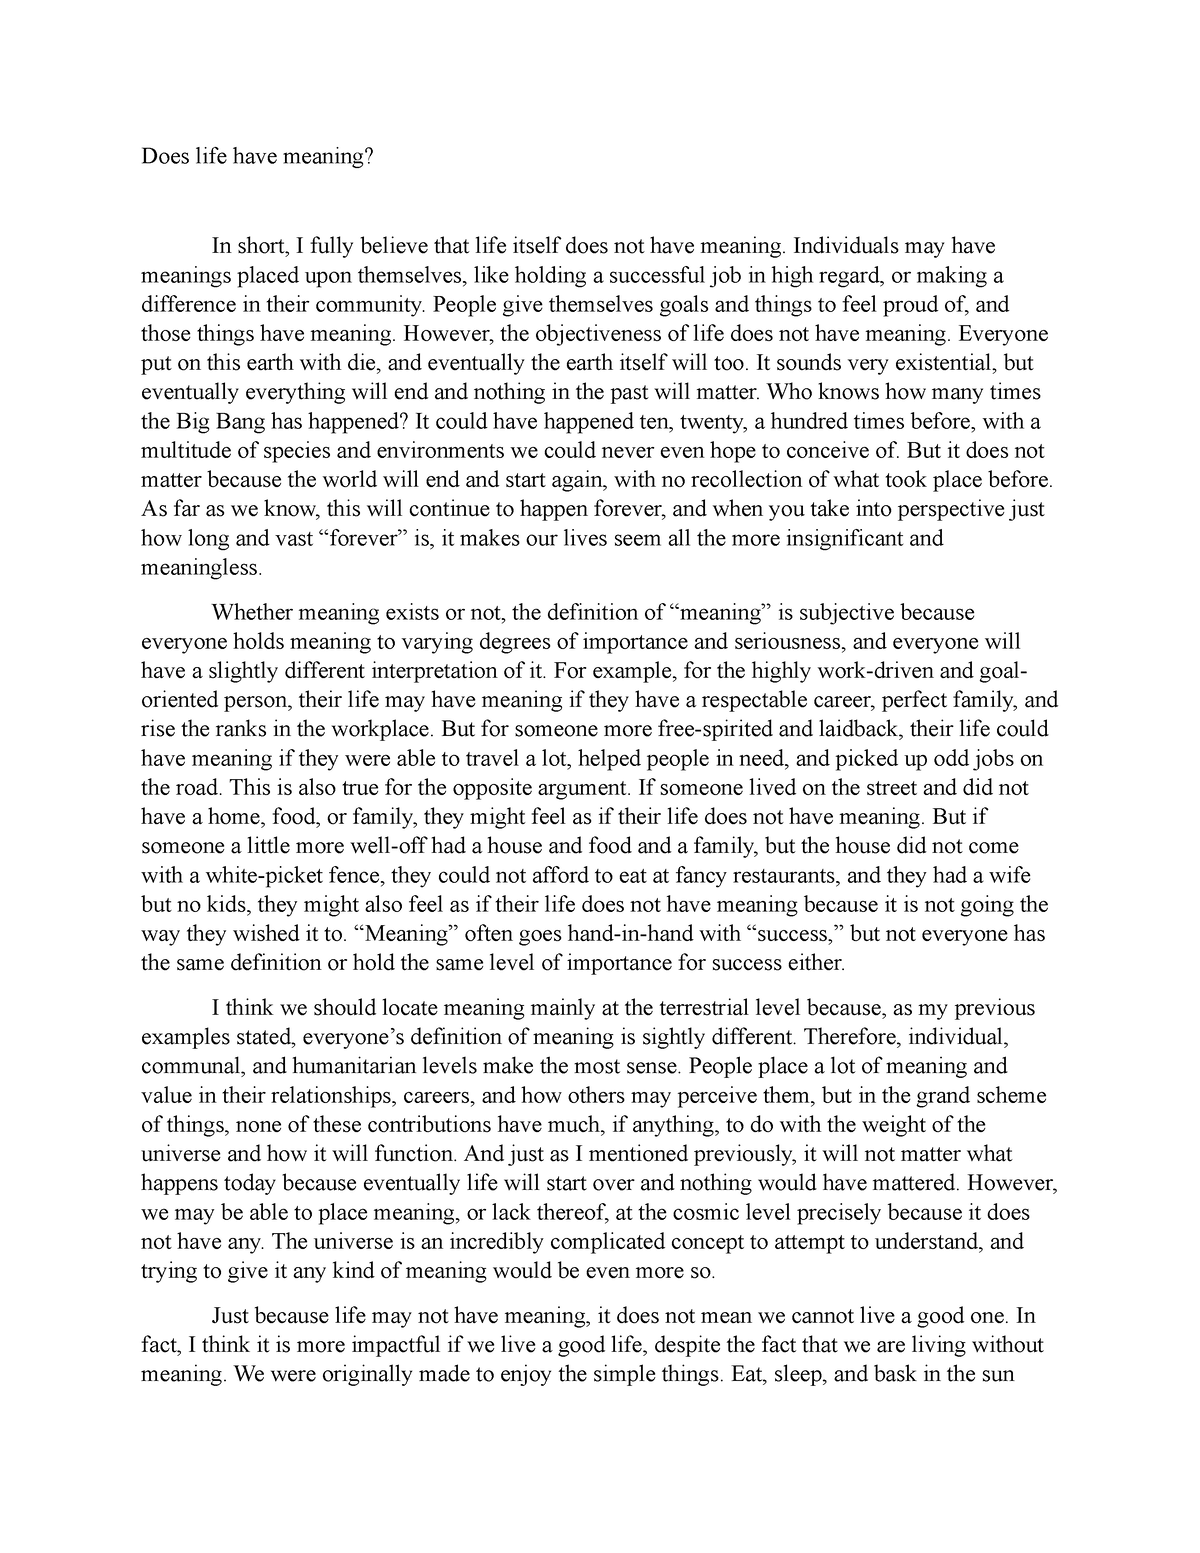 does life have meaning essay